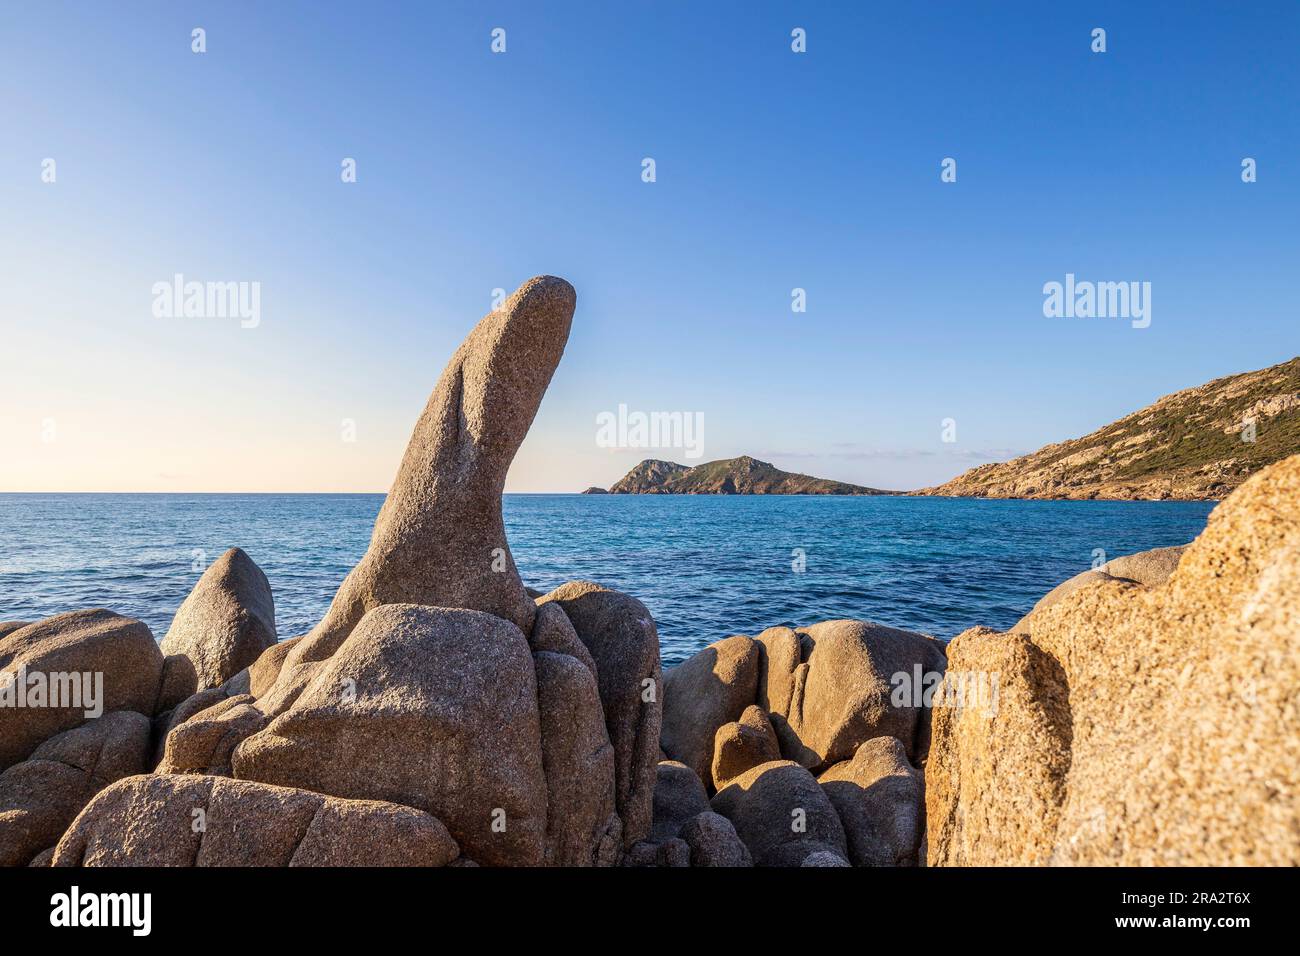 France, Var, peninsula of Saint-Tropez, Ramatuelle, unusual shapes of the pink granite rocks of the Pointe du Canadel, in the background the peninsula of Cap Taillat Stock Photo